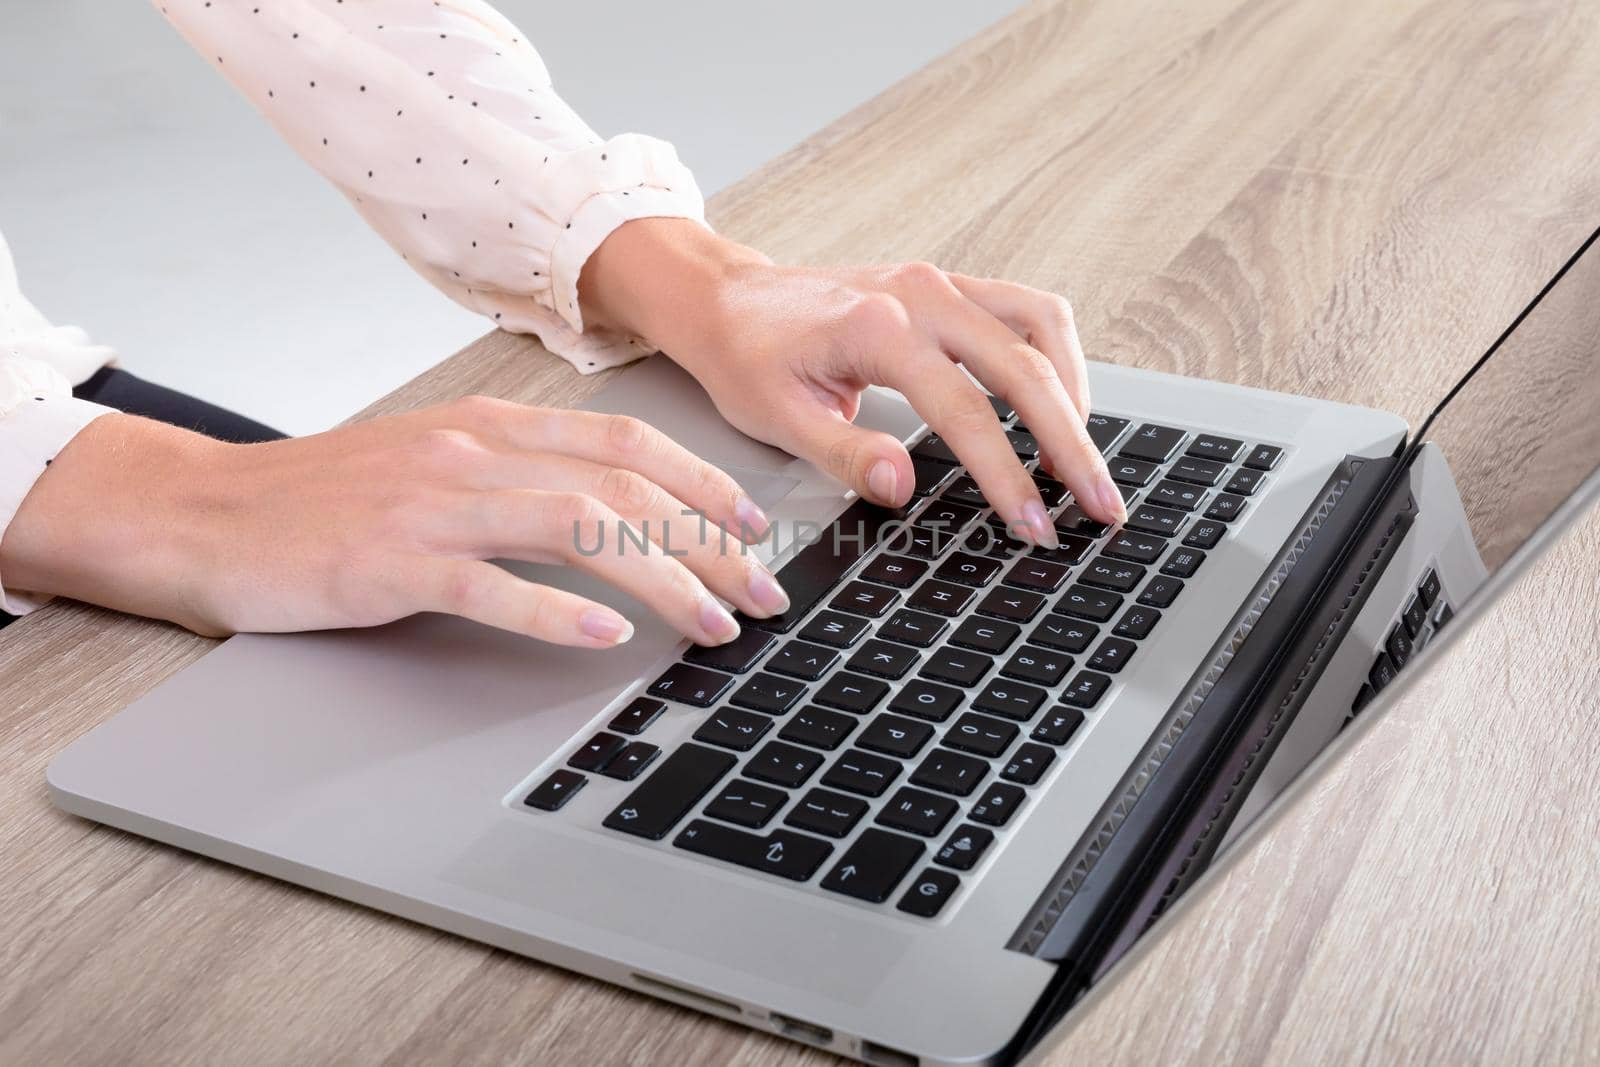 Midsection of caucasian businesswoman typing on keyboard, isolated on grey background by Wavebreakmedia